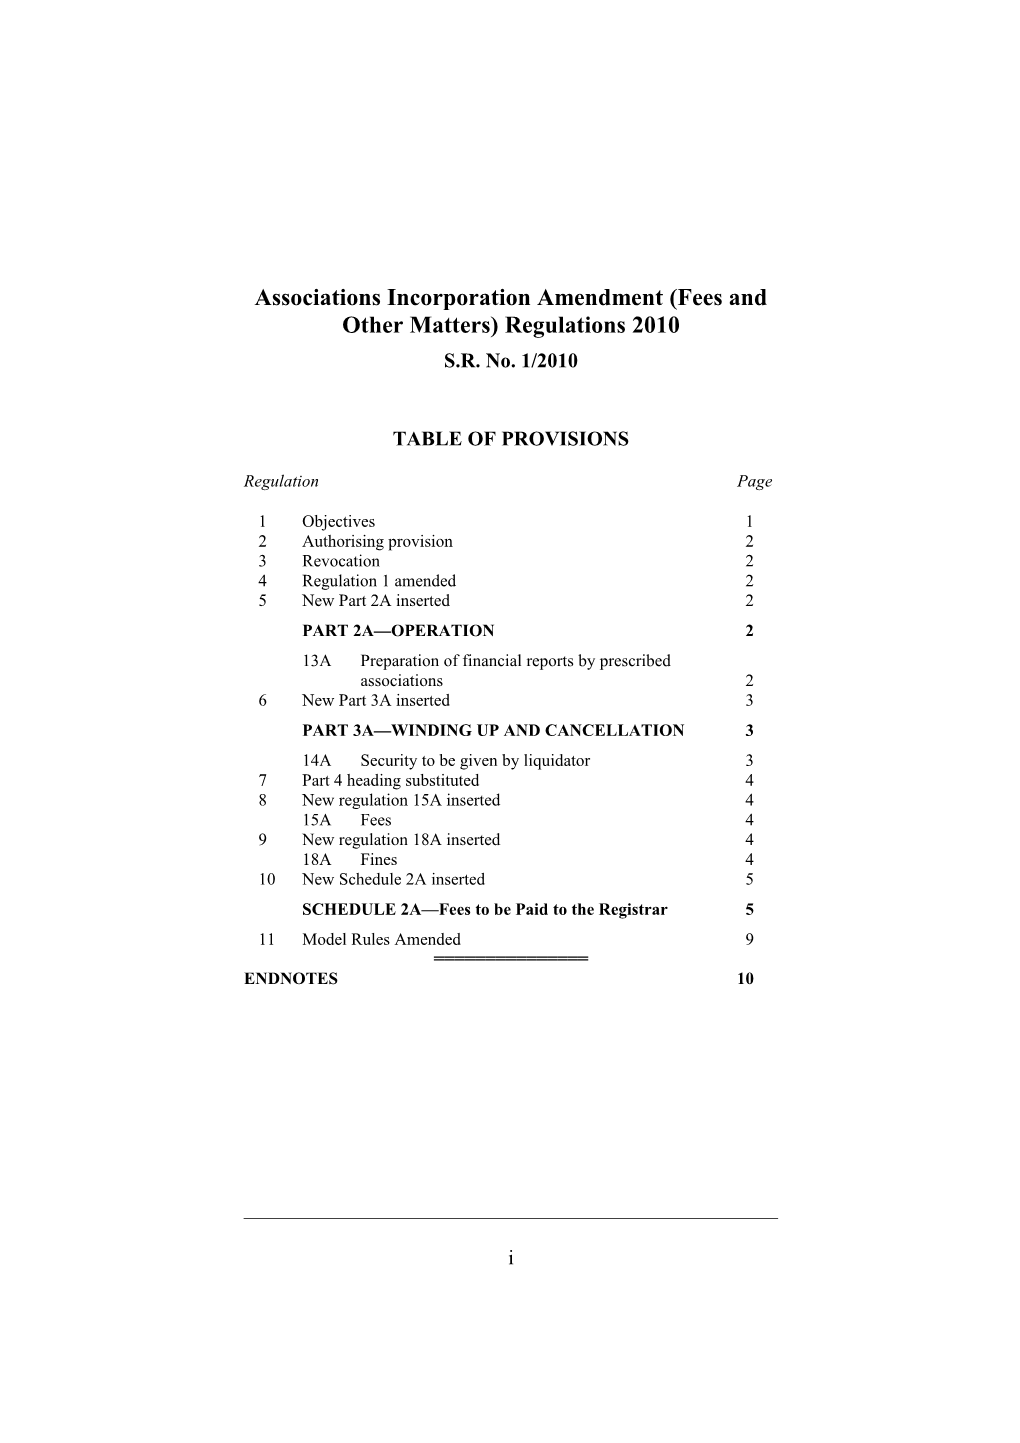 Associations Incorporation Amendment (Fees and Other Matters) Regulations 2010